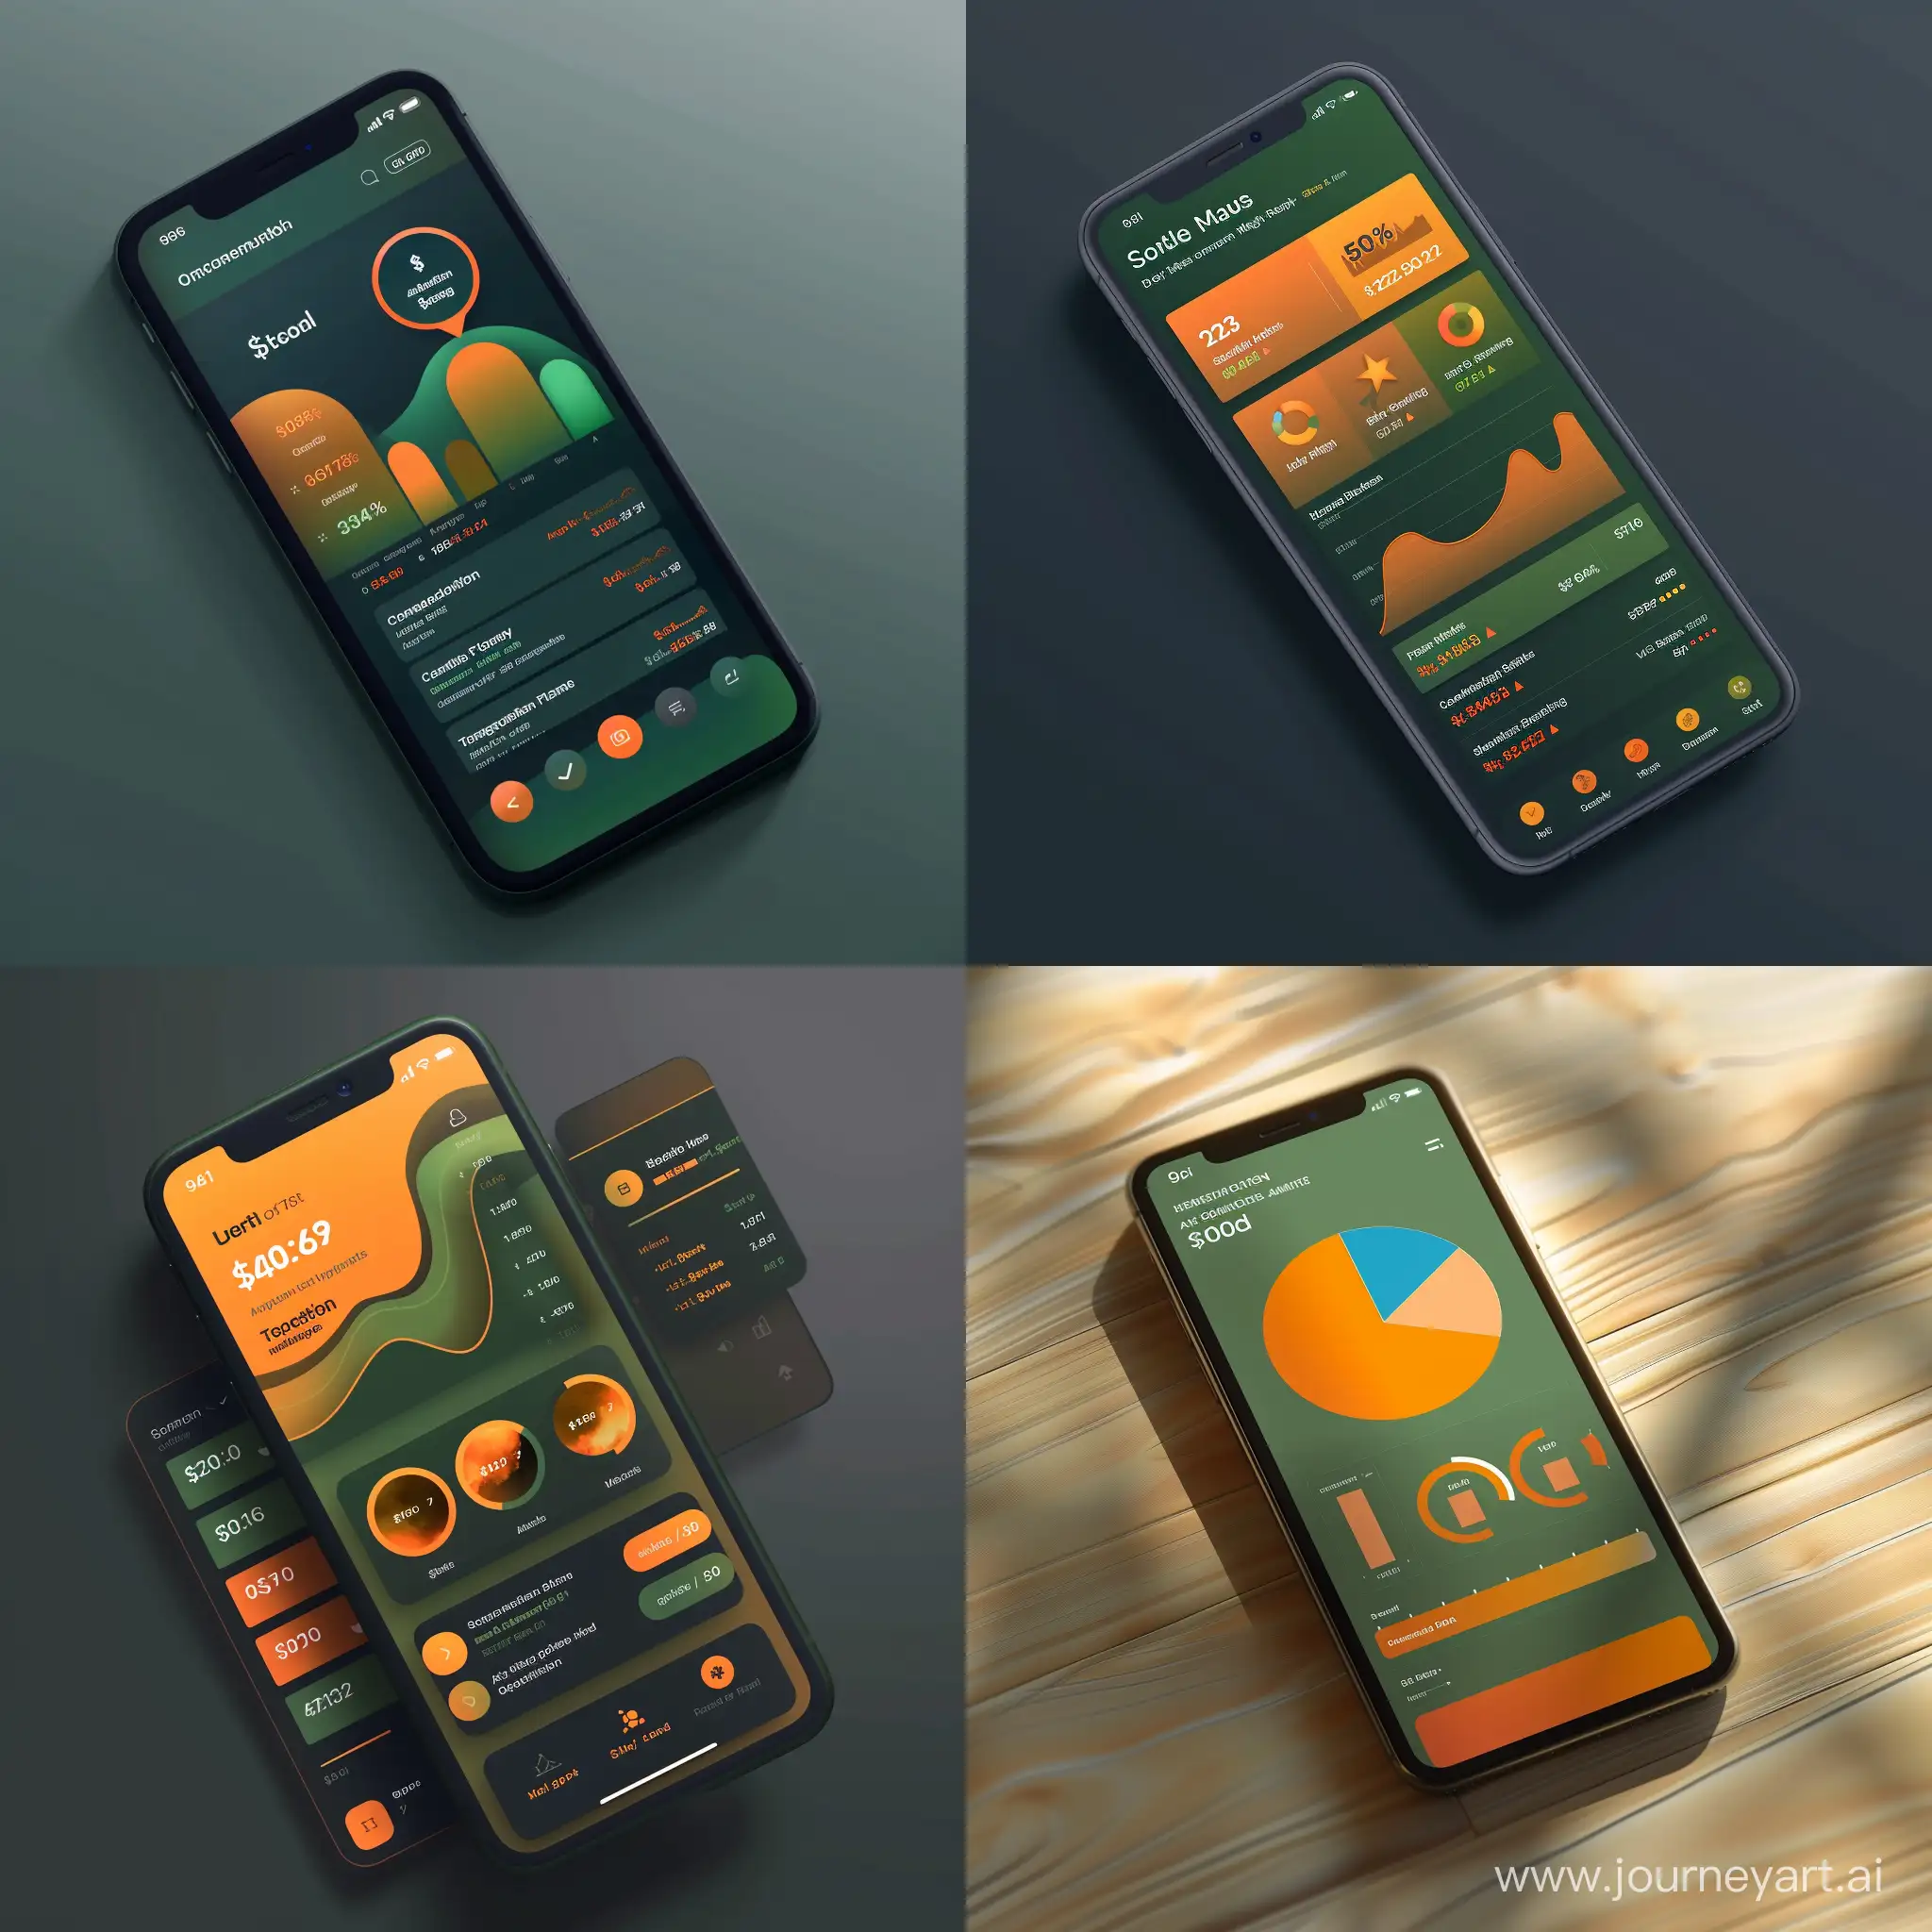 Money component modern ios app with main colors of matte green and orange

